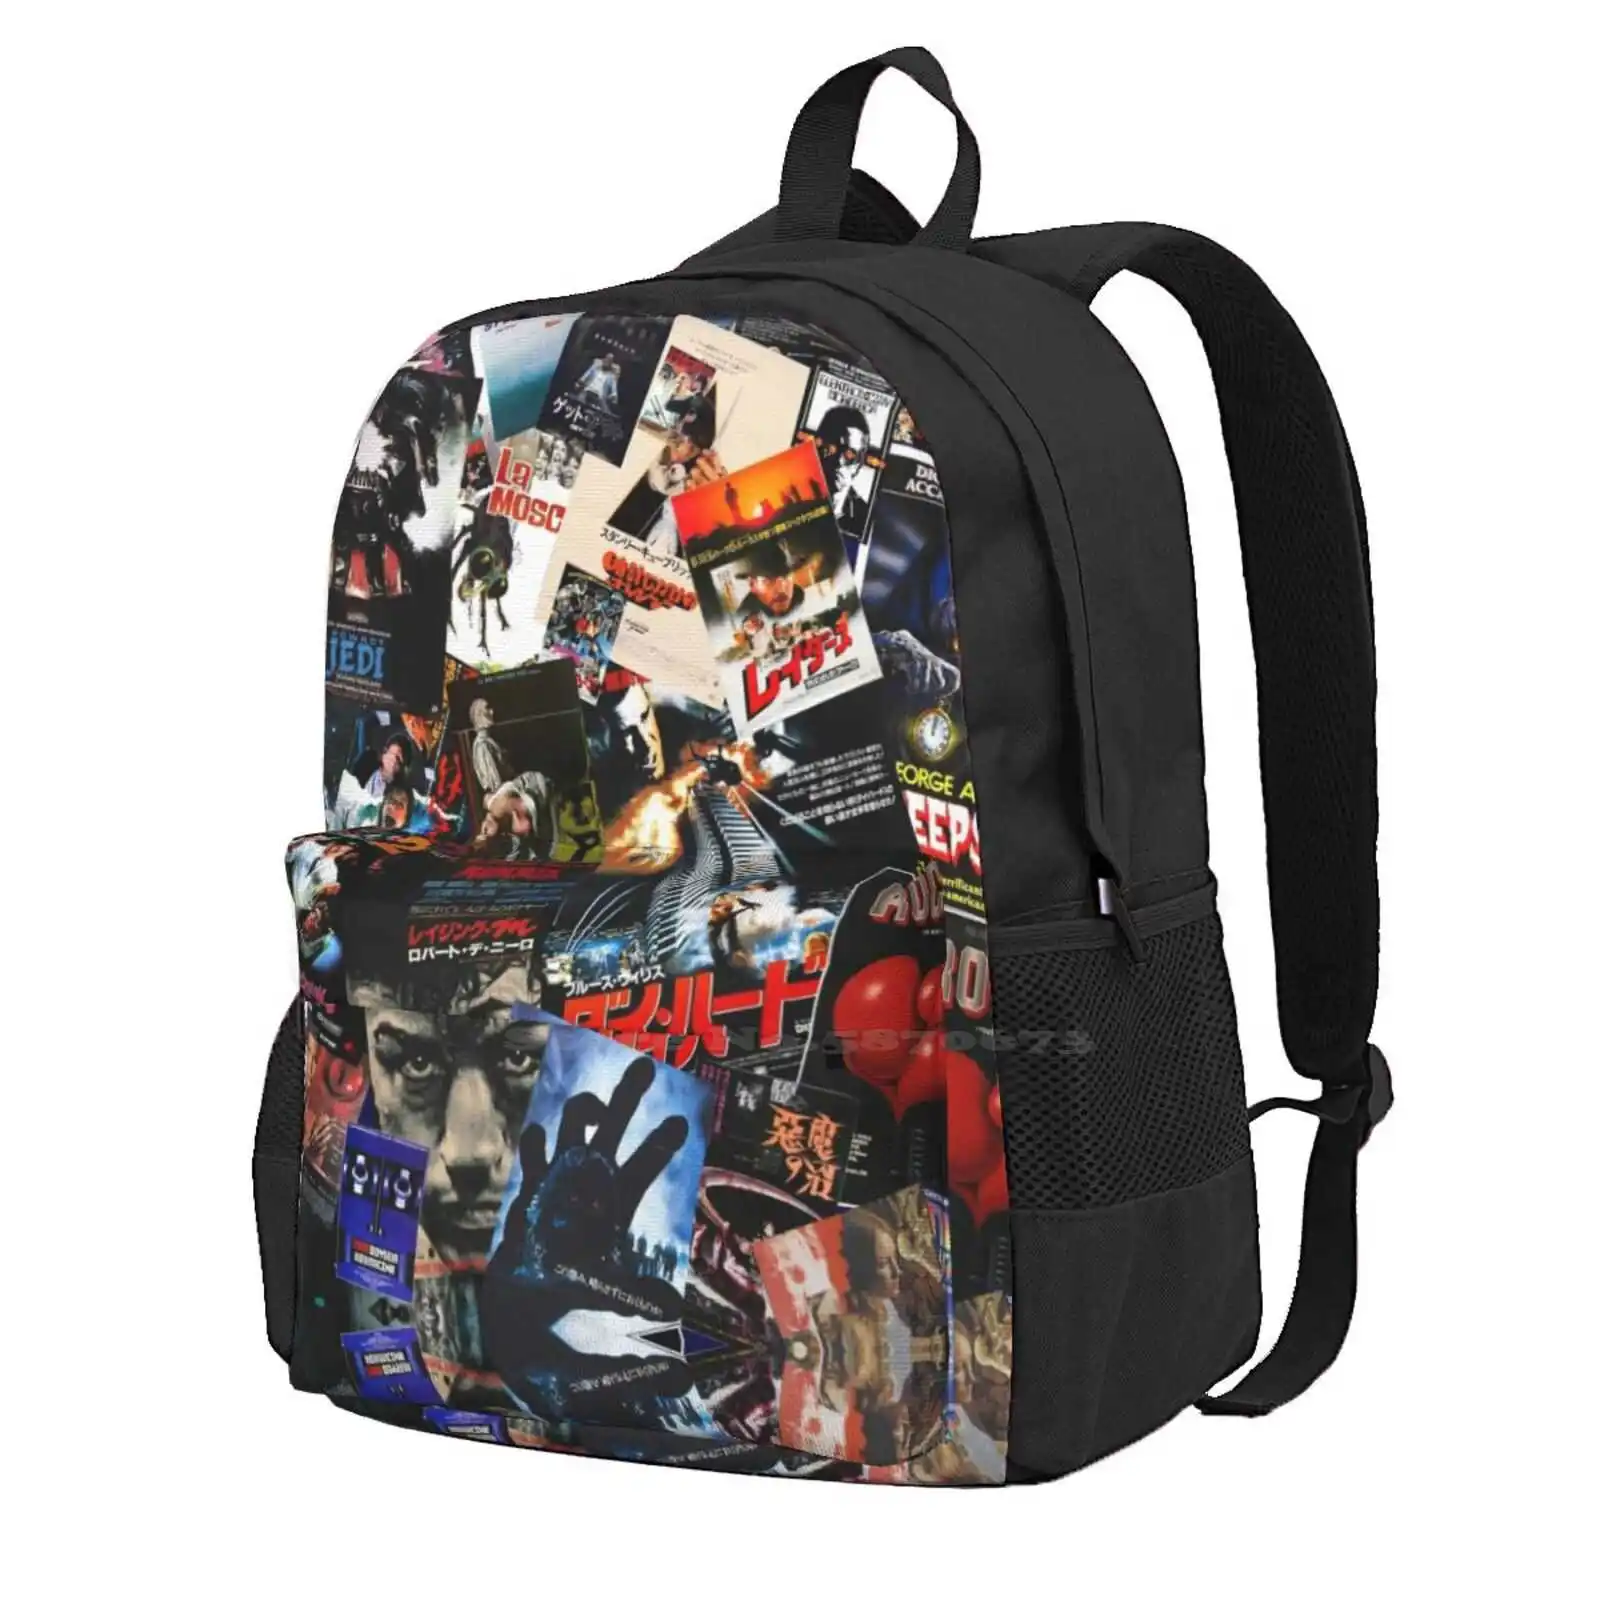 

Foreign Movie Posters Collage-Horror Fantasy Action Backpack For Student School Laptop Travel Bag 1980S 1990S 2000S 2010S Scifi